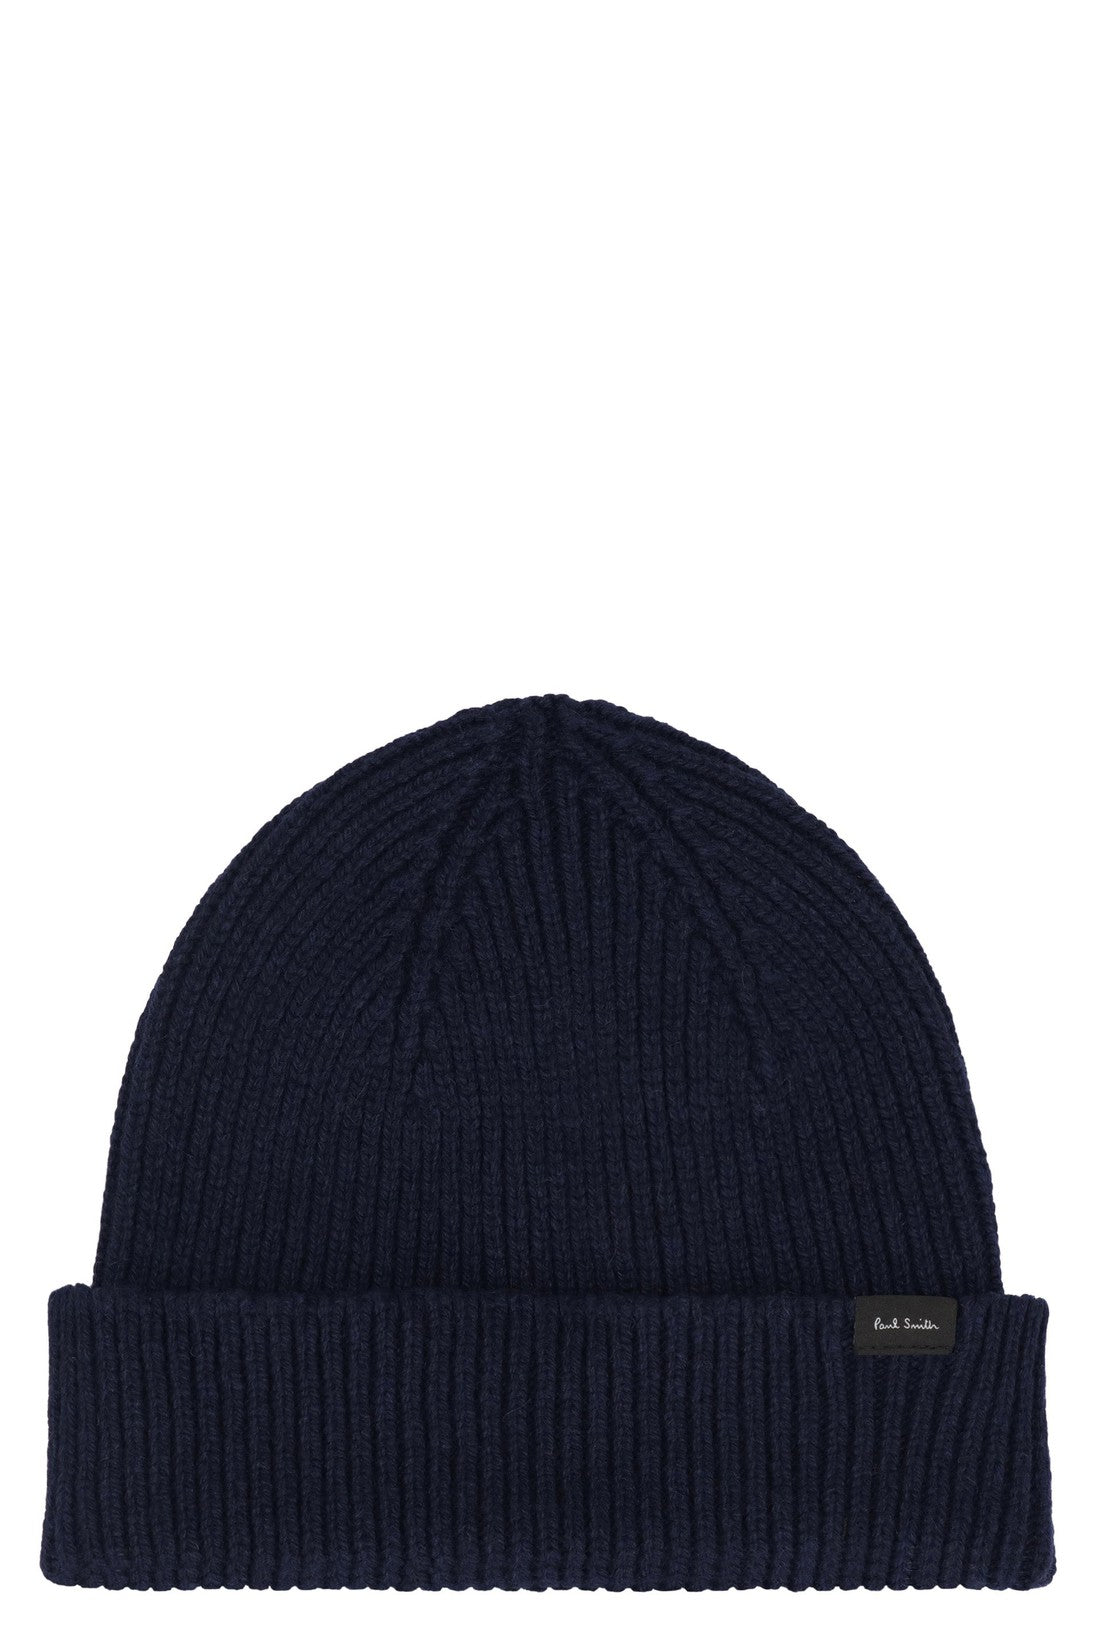 Paul Smith-OUTLET-SALE-Wool and cashmere hat-ARCHIVIST